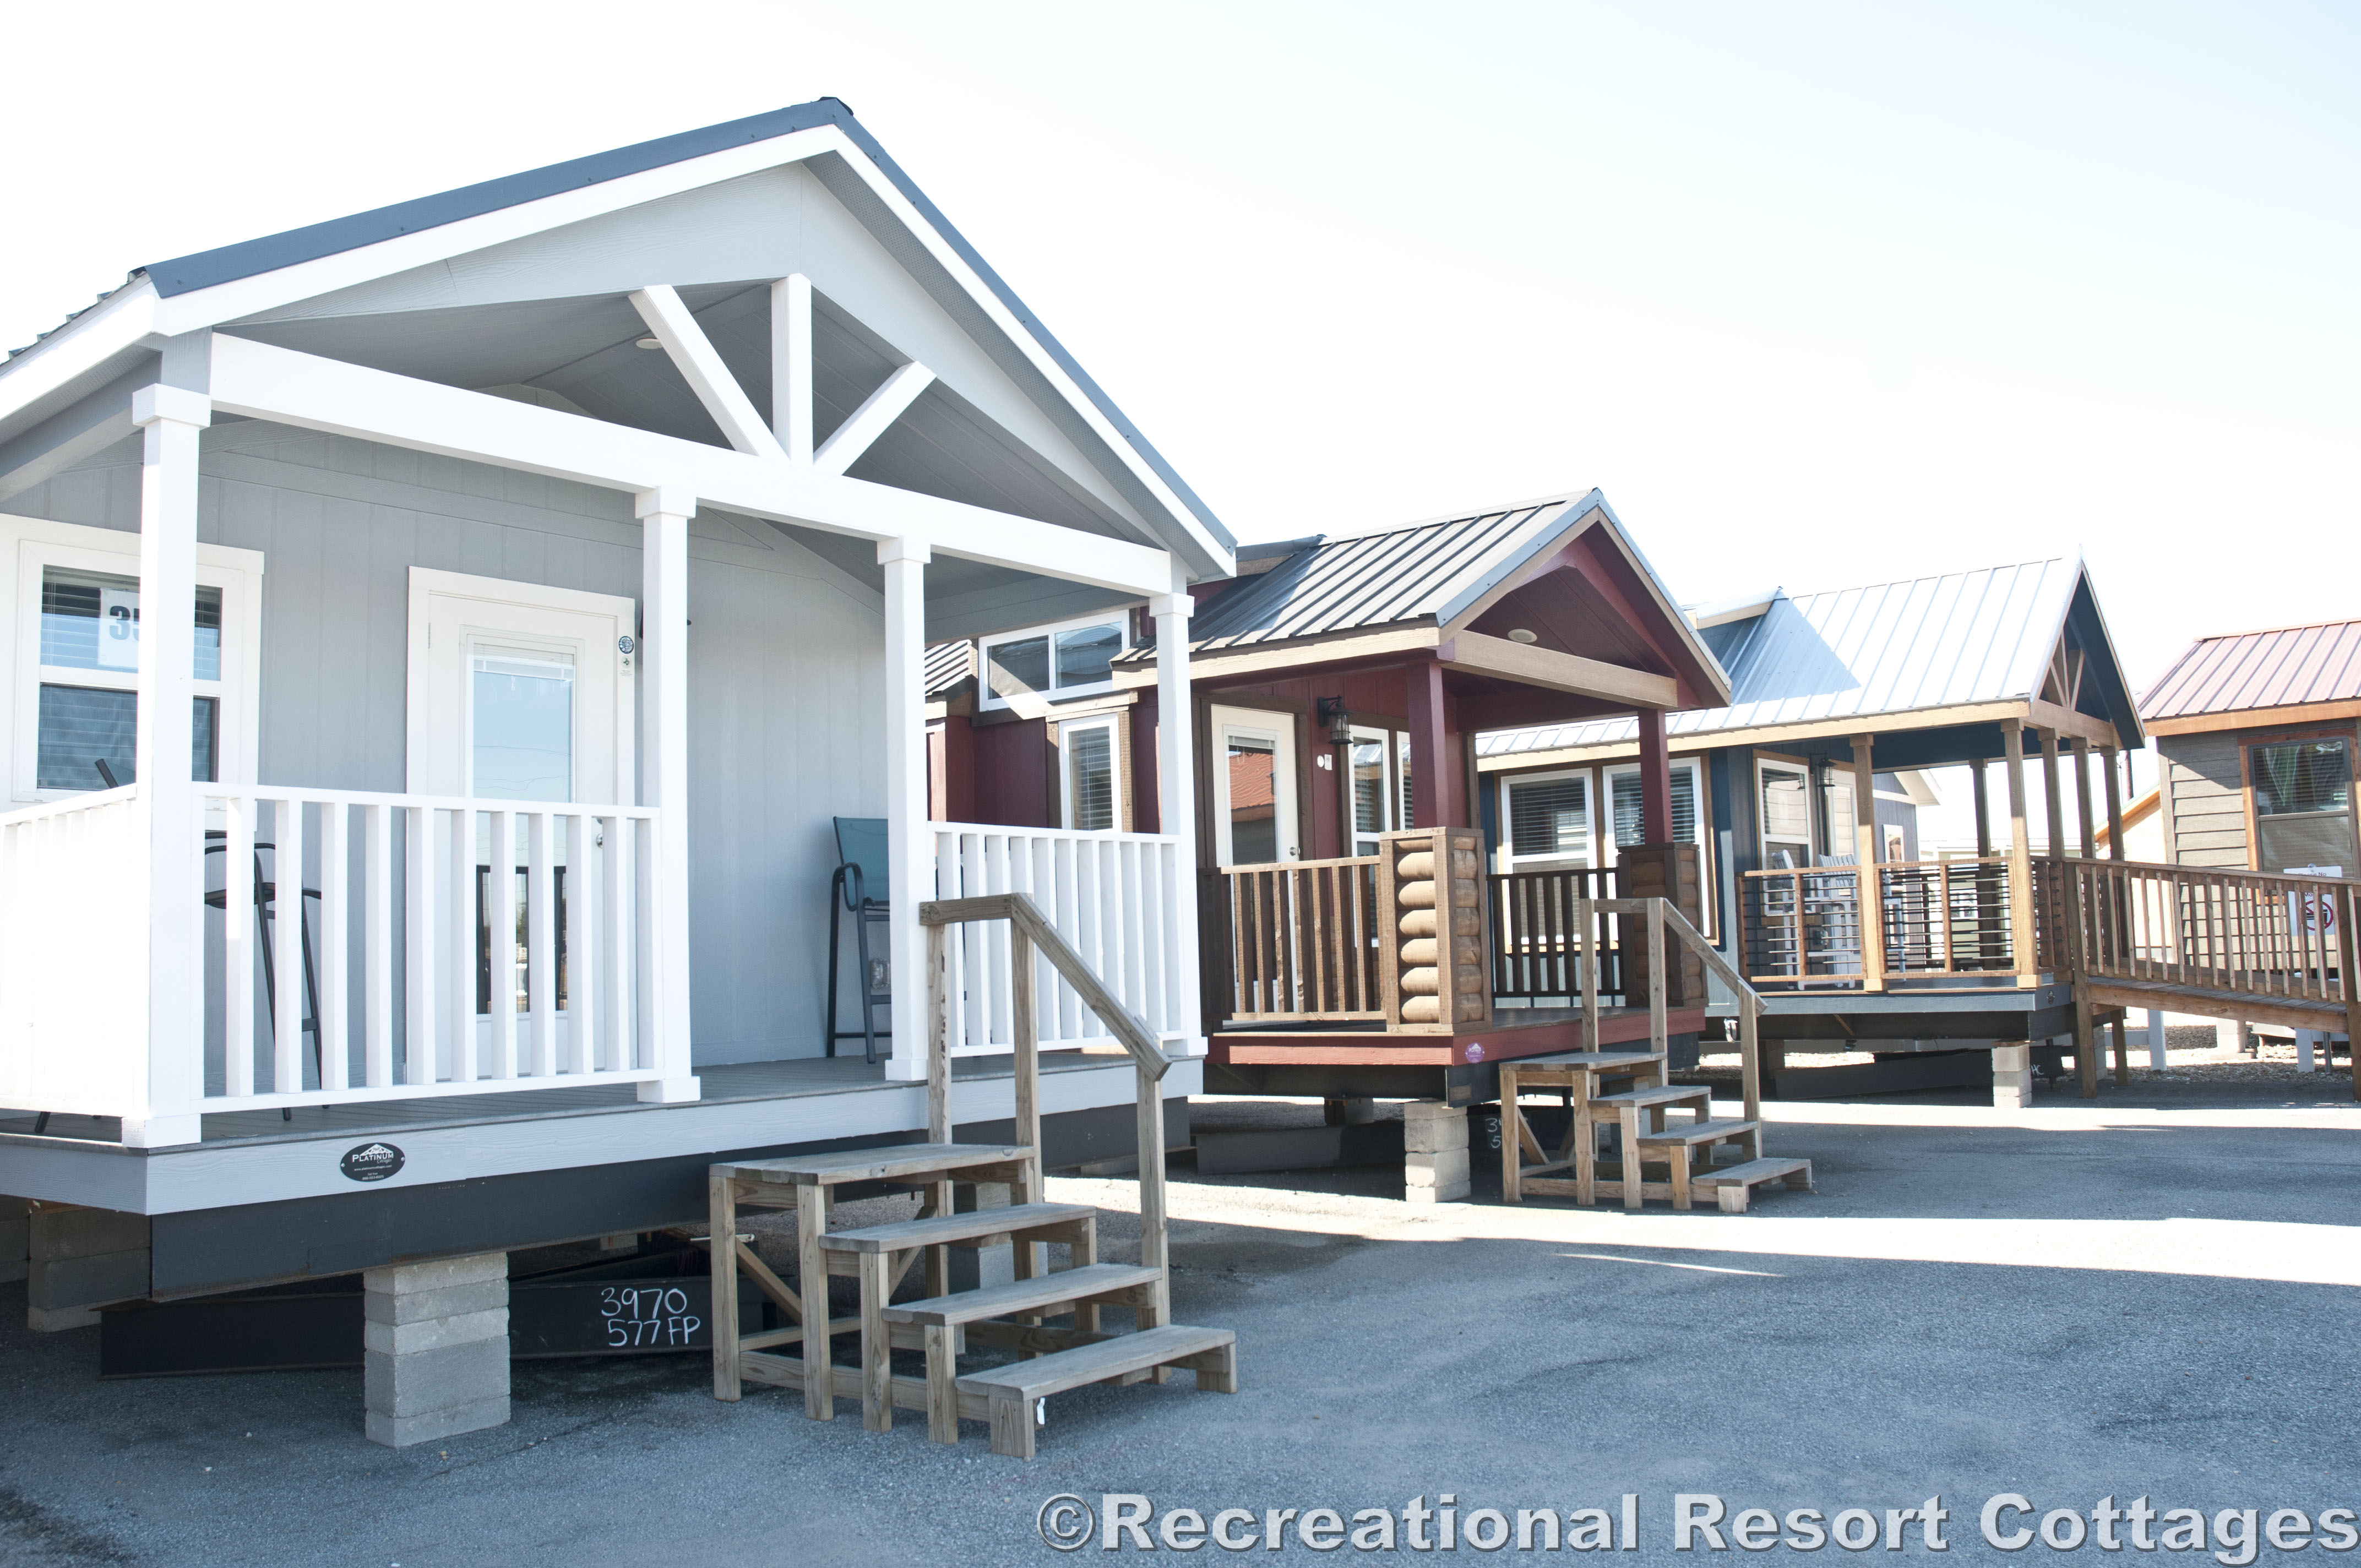 Tiny Homes For Sale At Recreational Resort Cottages And Cabins In Rockwall Texas